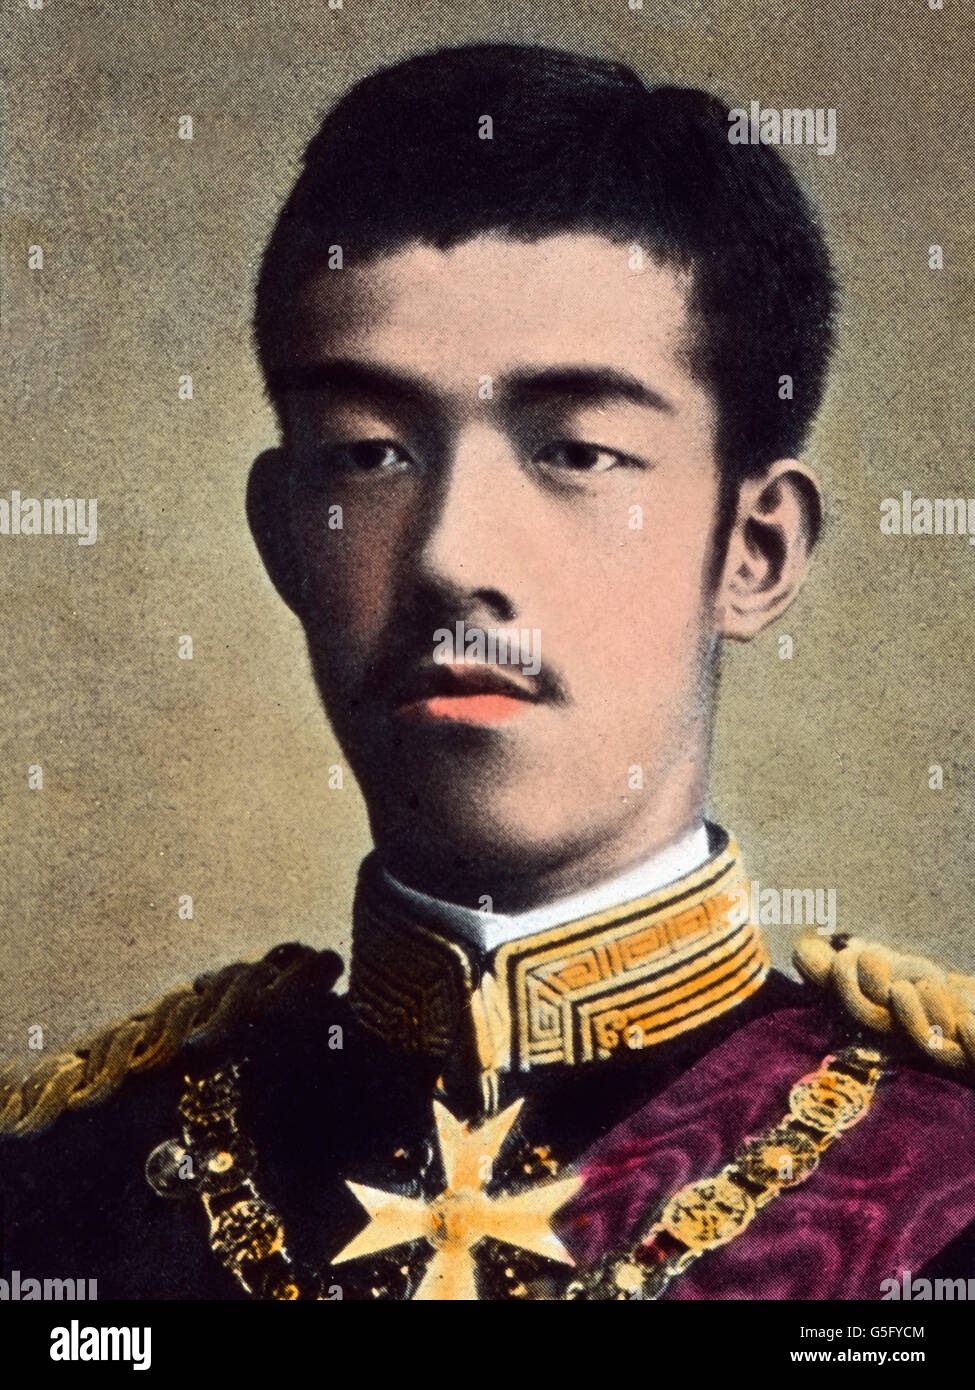 Der Kaiser von Japan. Japanese emperor Hirohito. travel, history, historical, 1910s, 20th century, archive, Carl Simon, hand coloured glass slide, man, emperor, imperial, uniform, order, portrait, soldier, official Stock Photo